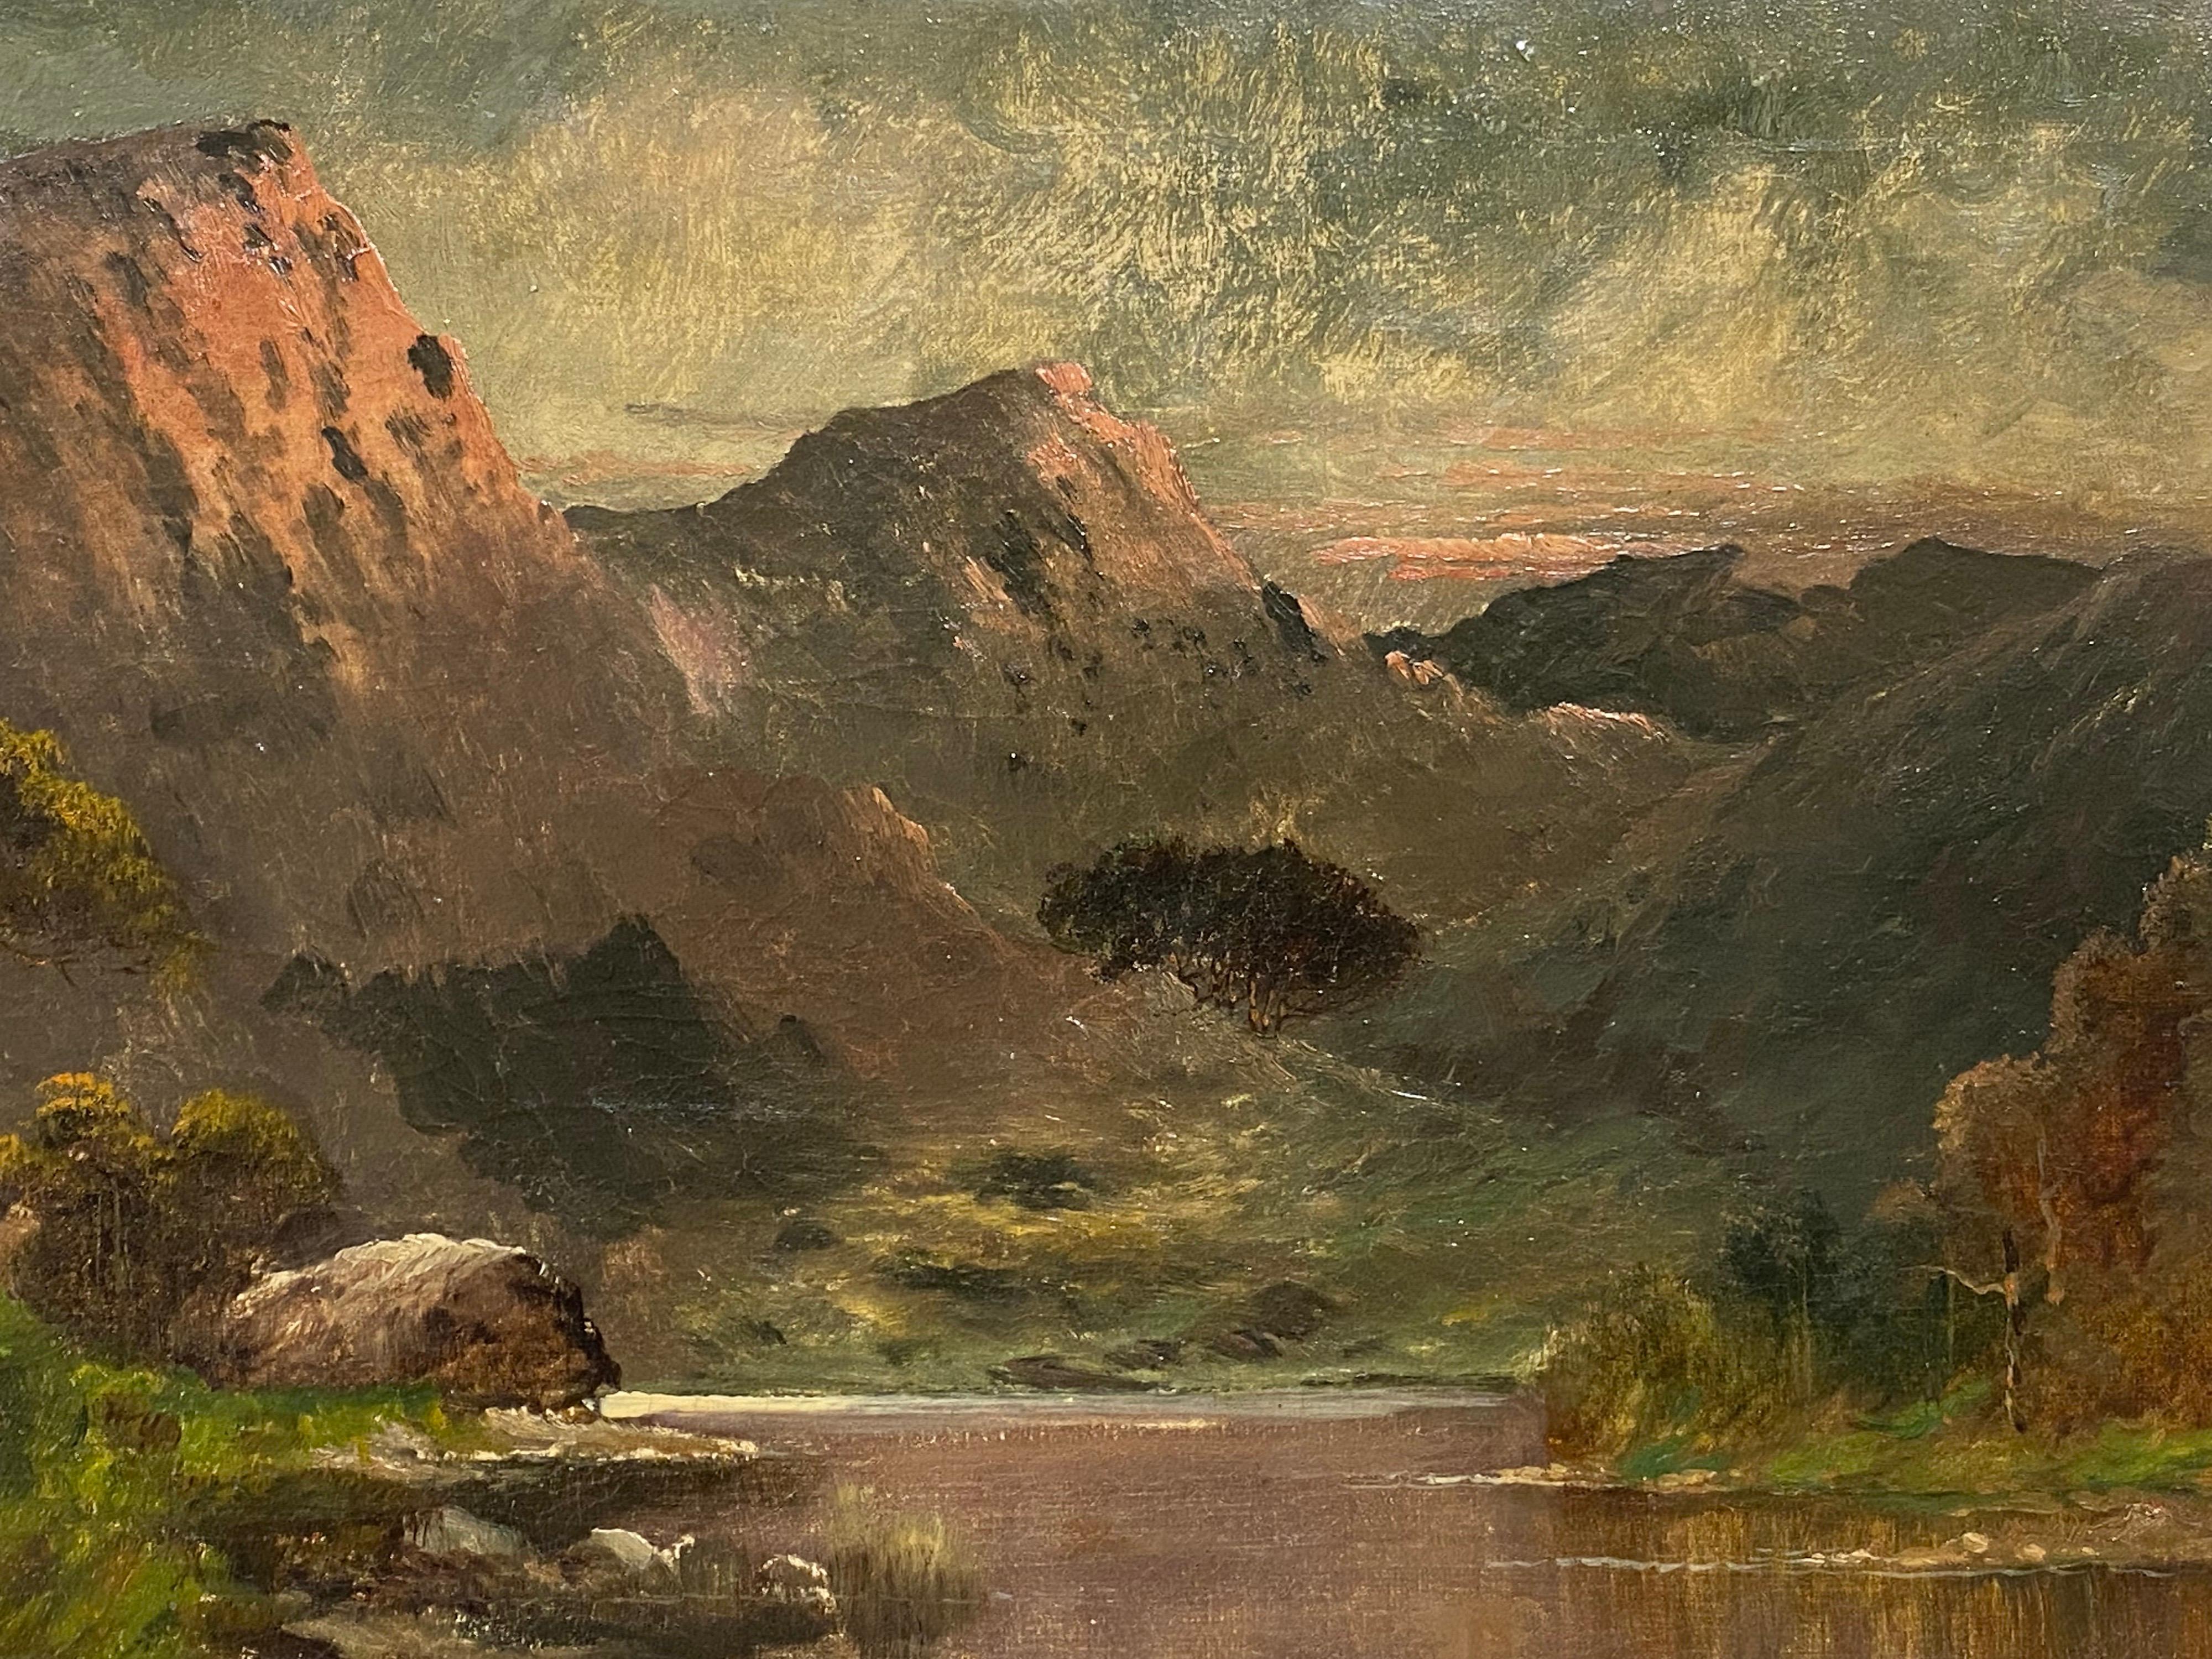 Antique Scottish Highlands Oil Painting Sunset Loch landscape with Mountains - Brown Figurative Painting by Francis E. Jamieson